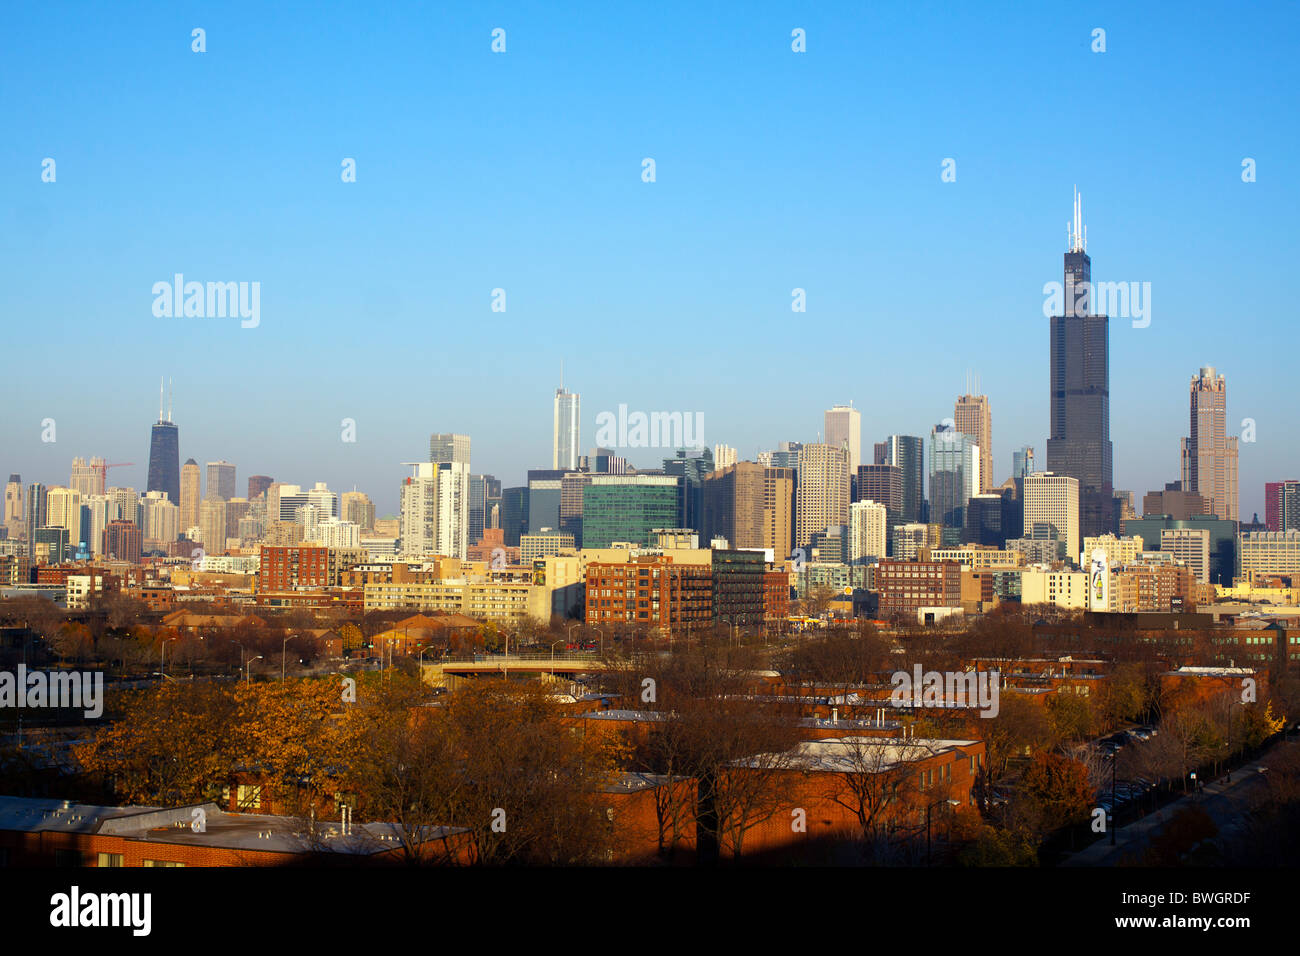 The Sears/Willis Tower dominates the Chicago skyline in this seasonal fall view from the west side of the city. Stock Photo